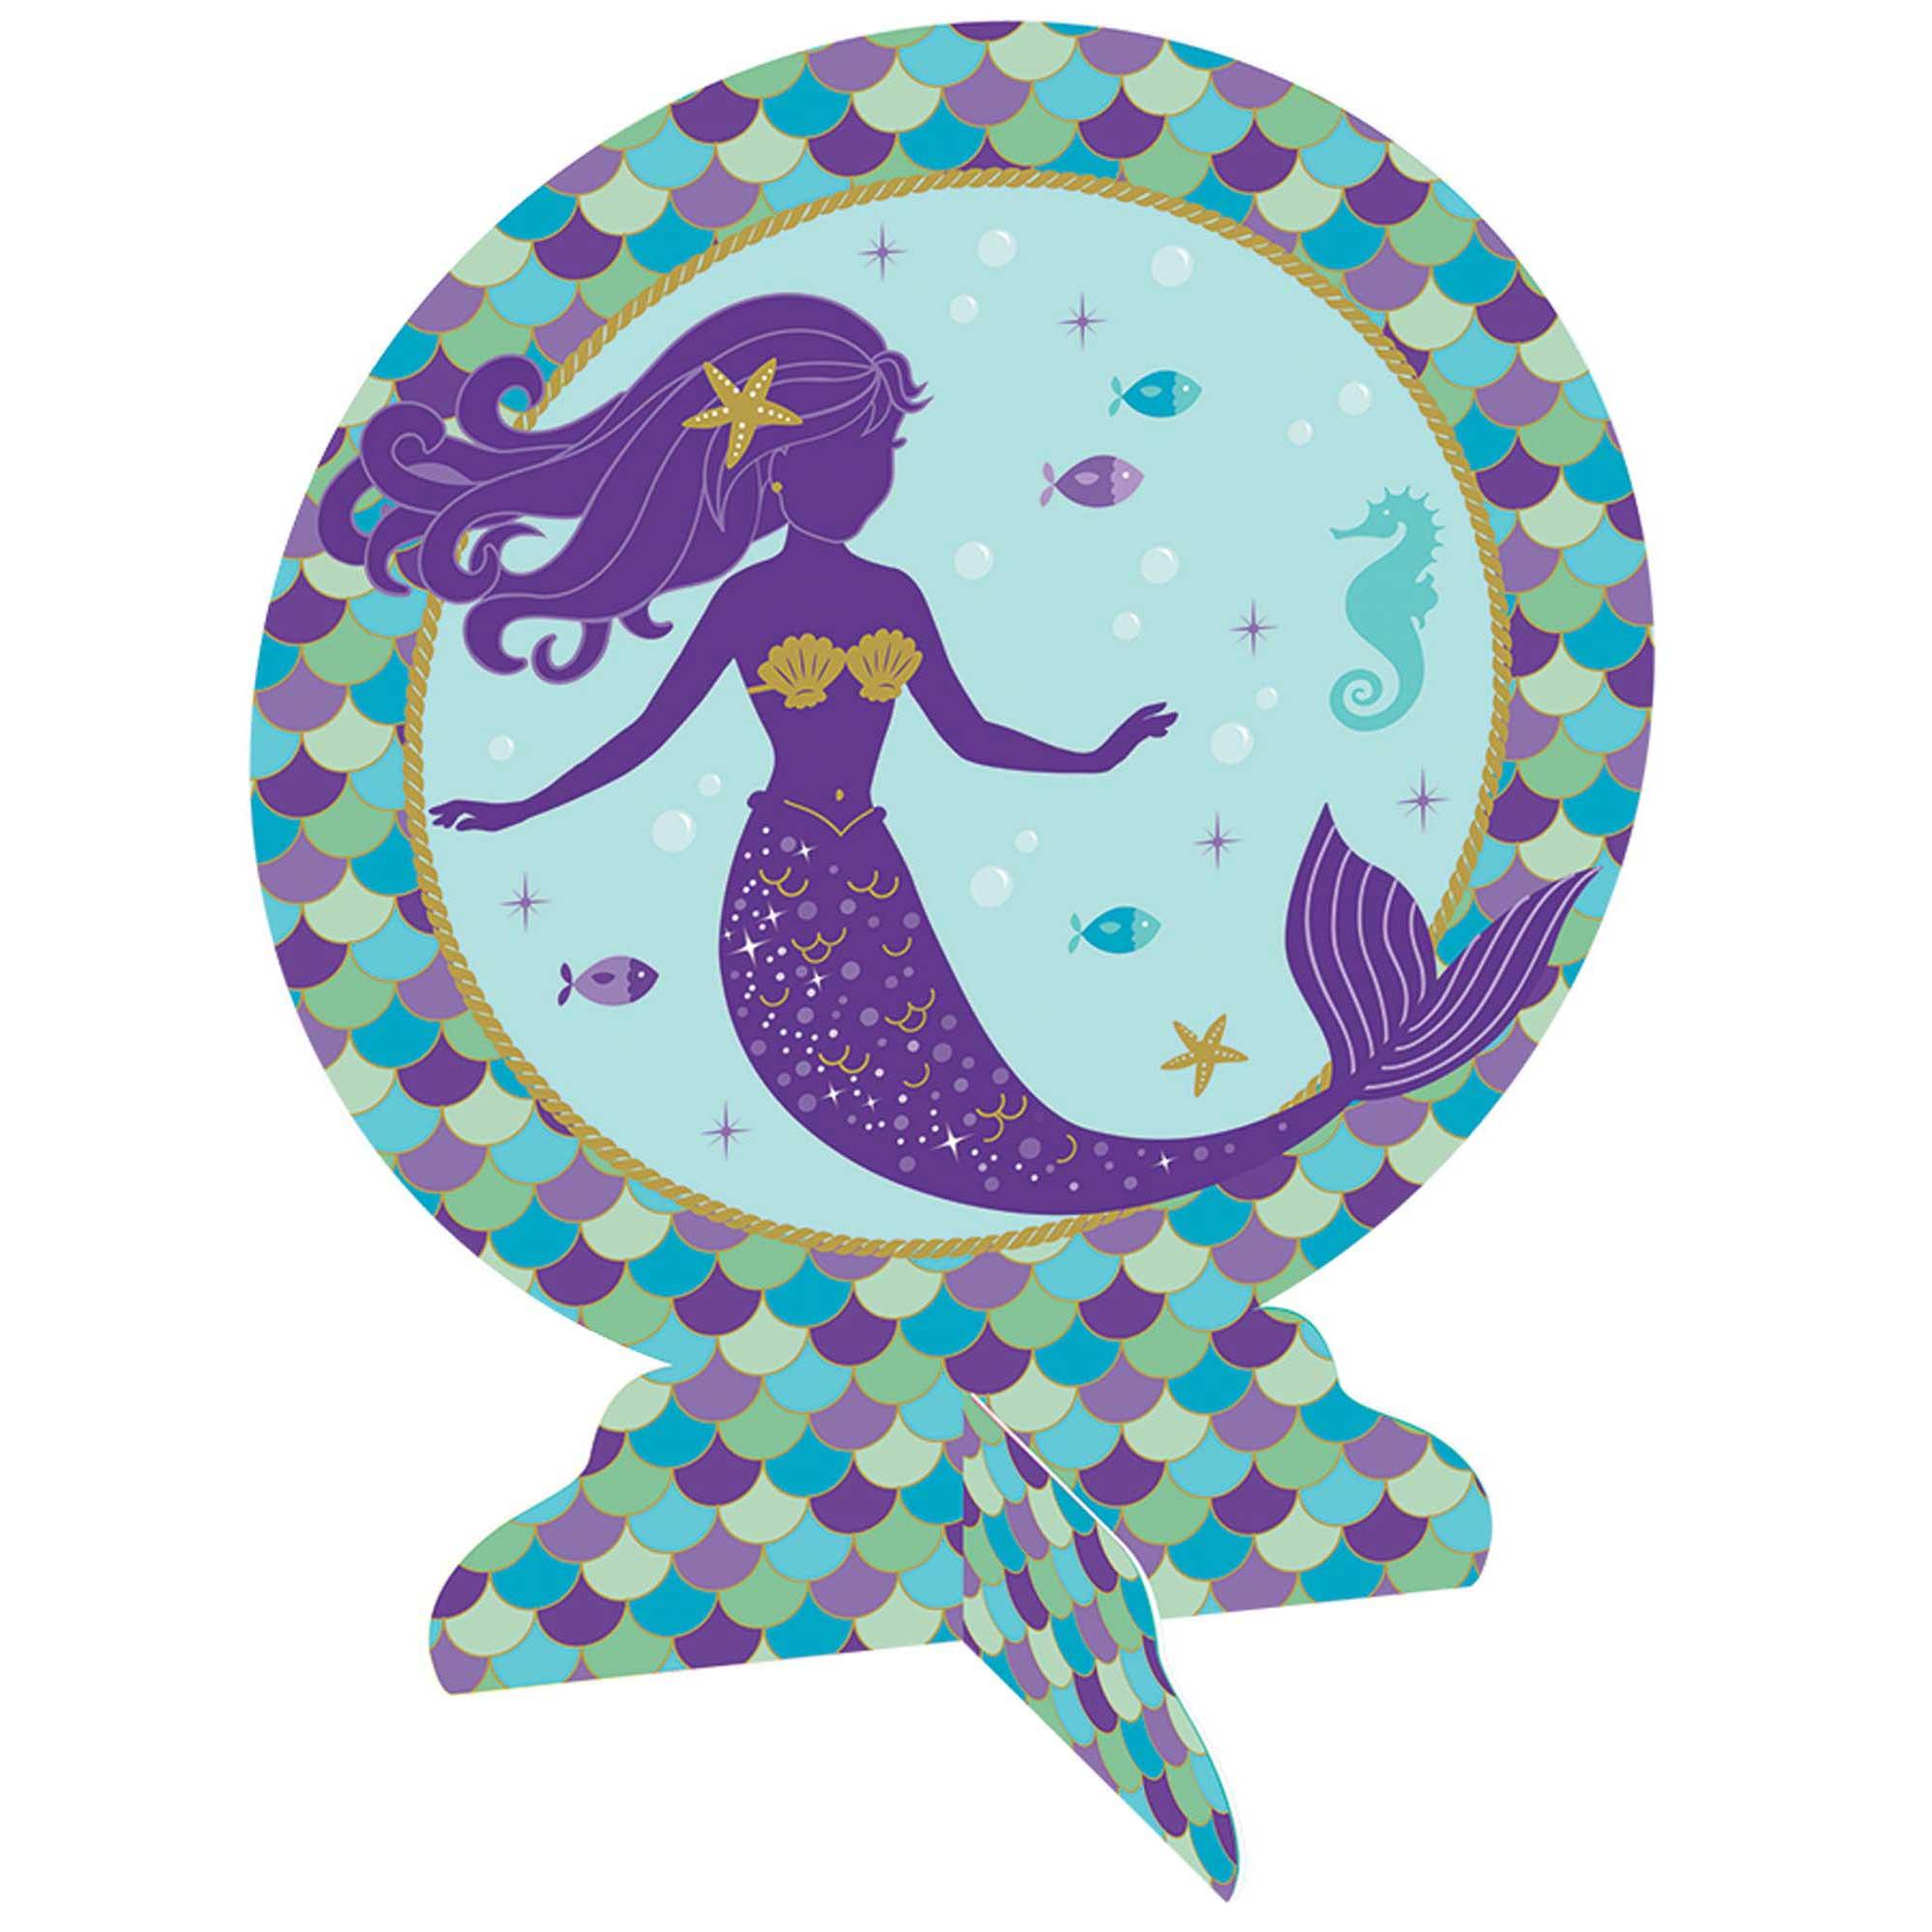 Mermaid Wishes 3-D Paper Table Centerpiece - Party Centre